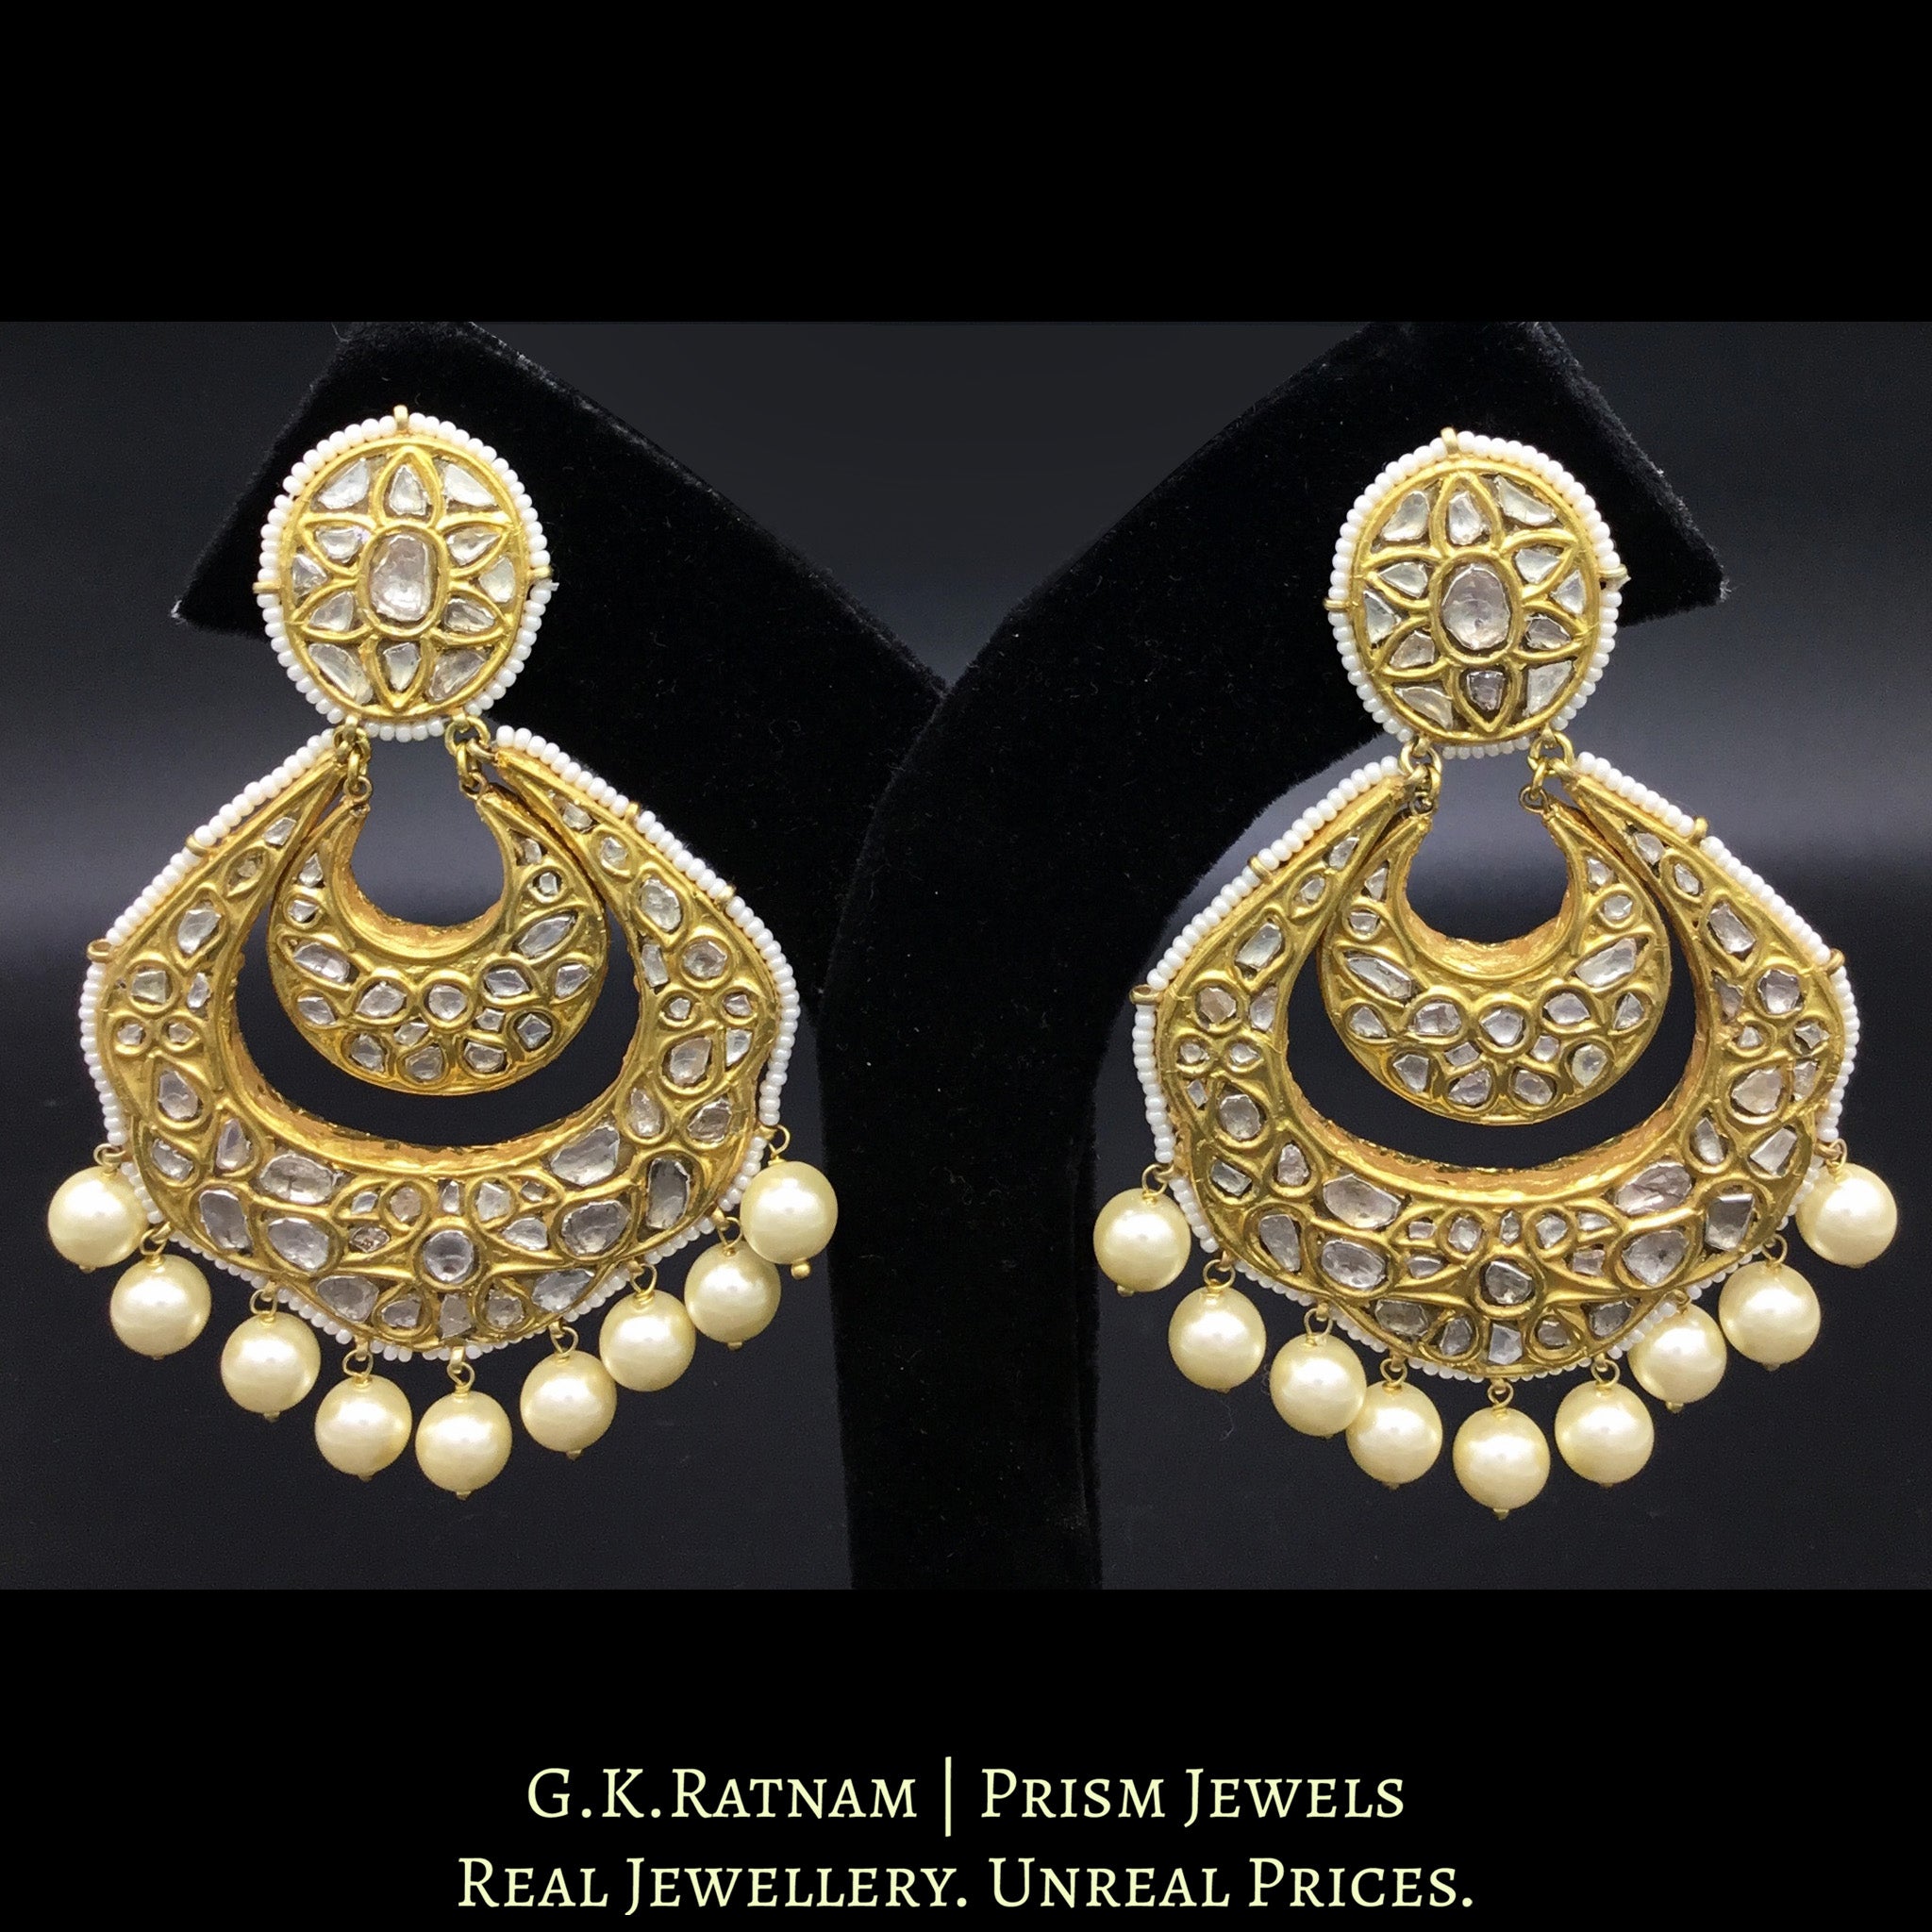 23k Gold and Diamond Polki multi-layered Chand Bali Earring Pair with pearl hangings